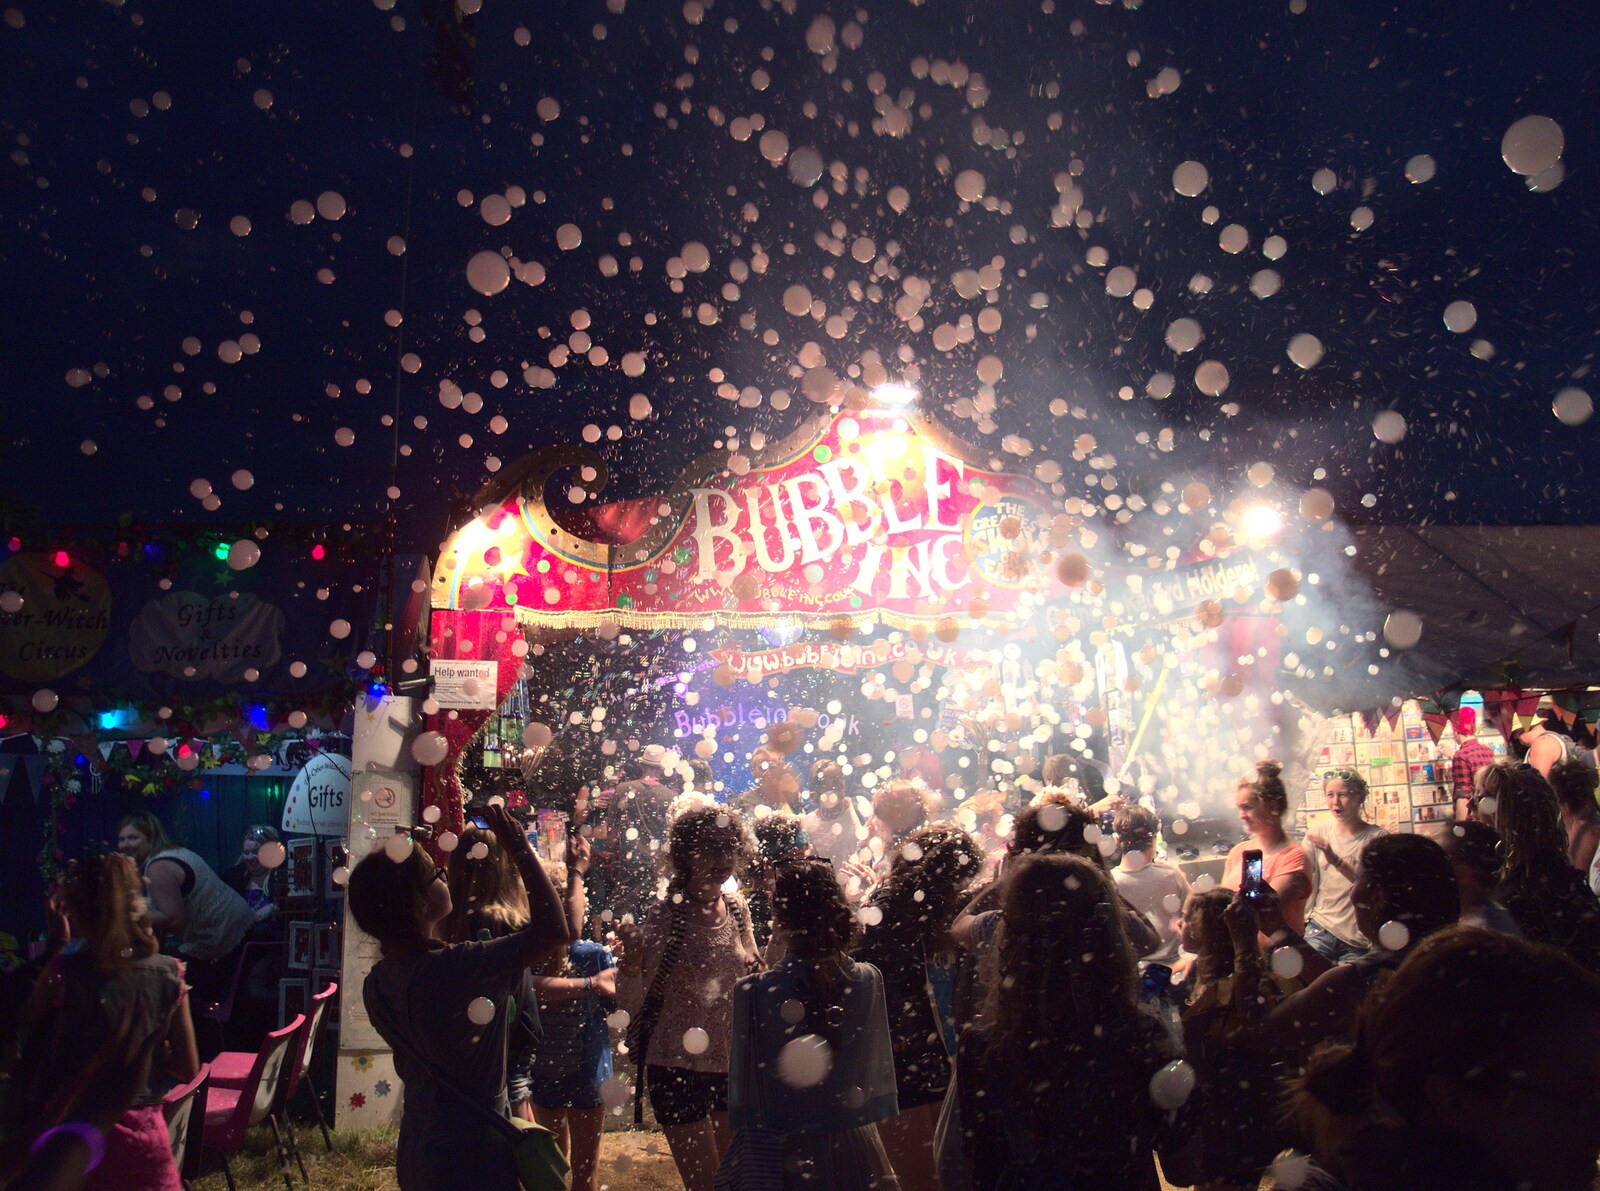 More bubbles, everywhere from Latitude Festival, Henham Park, Southwold, Suffolk - 17th July 2014